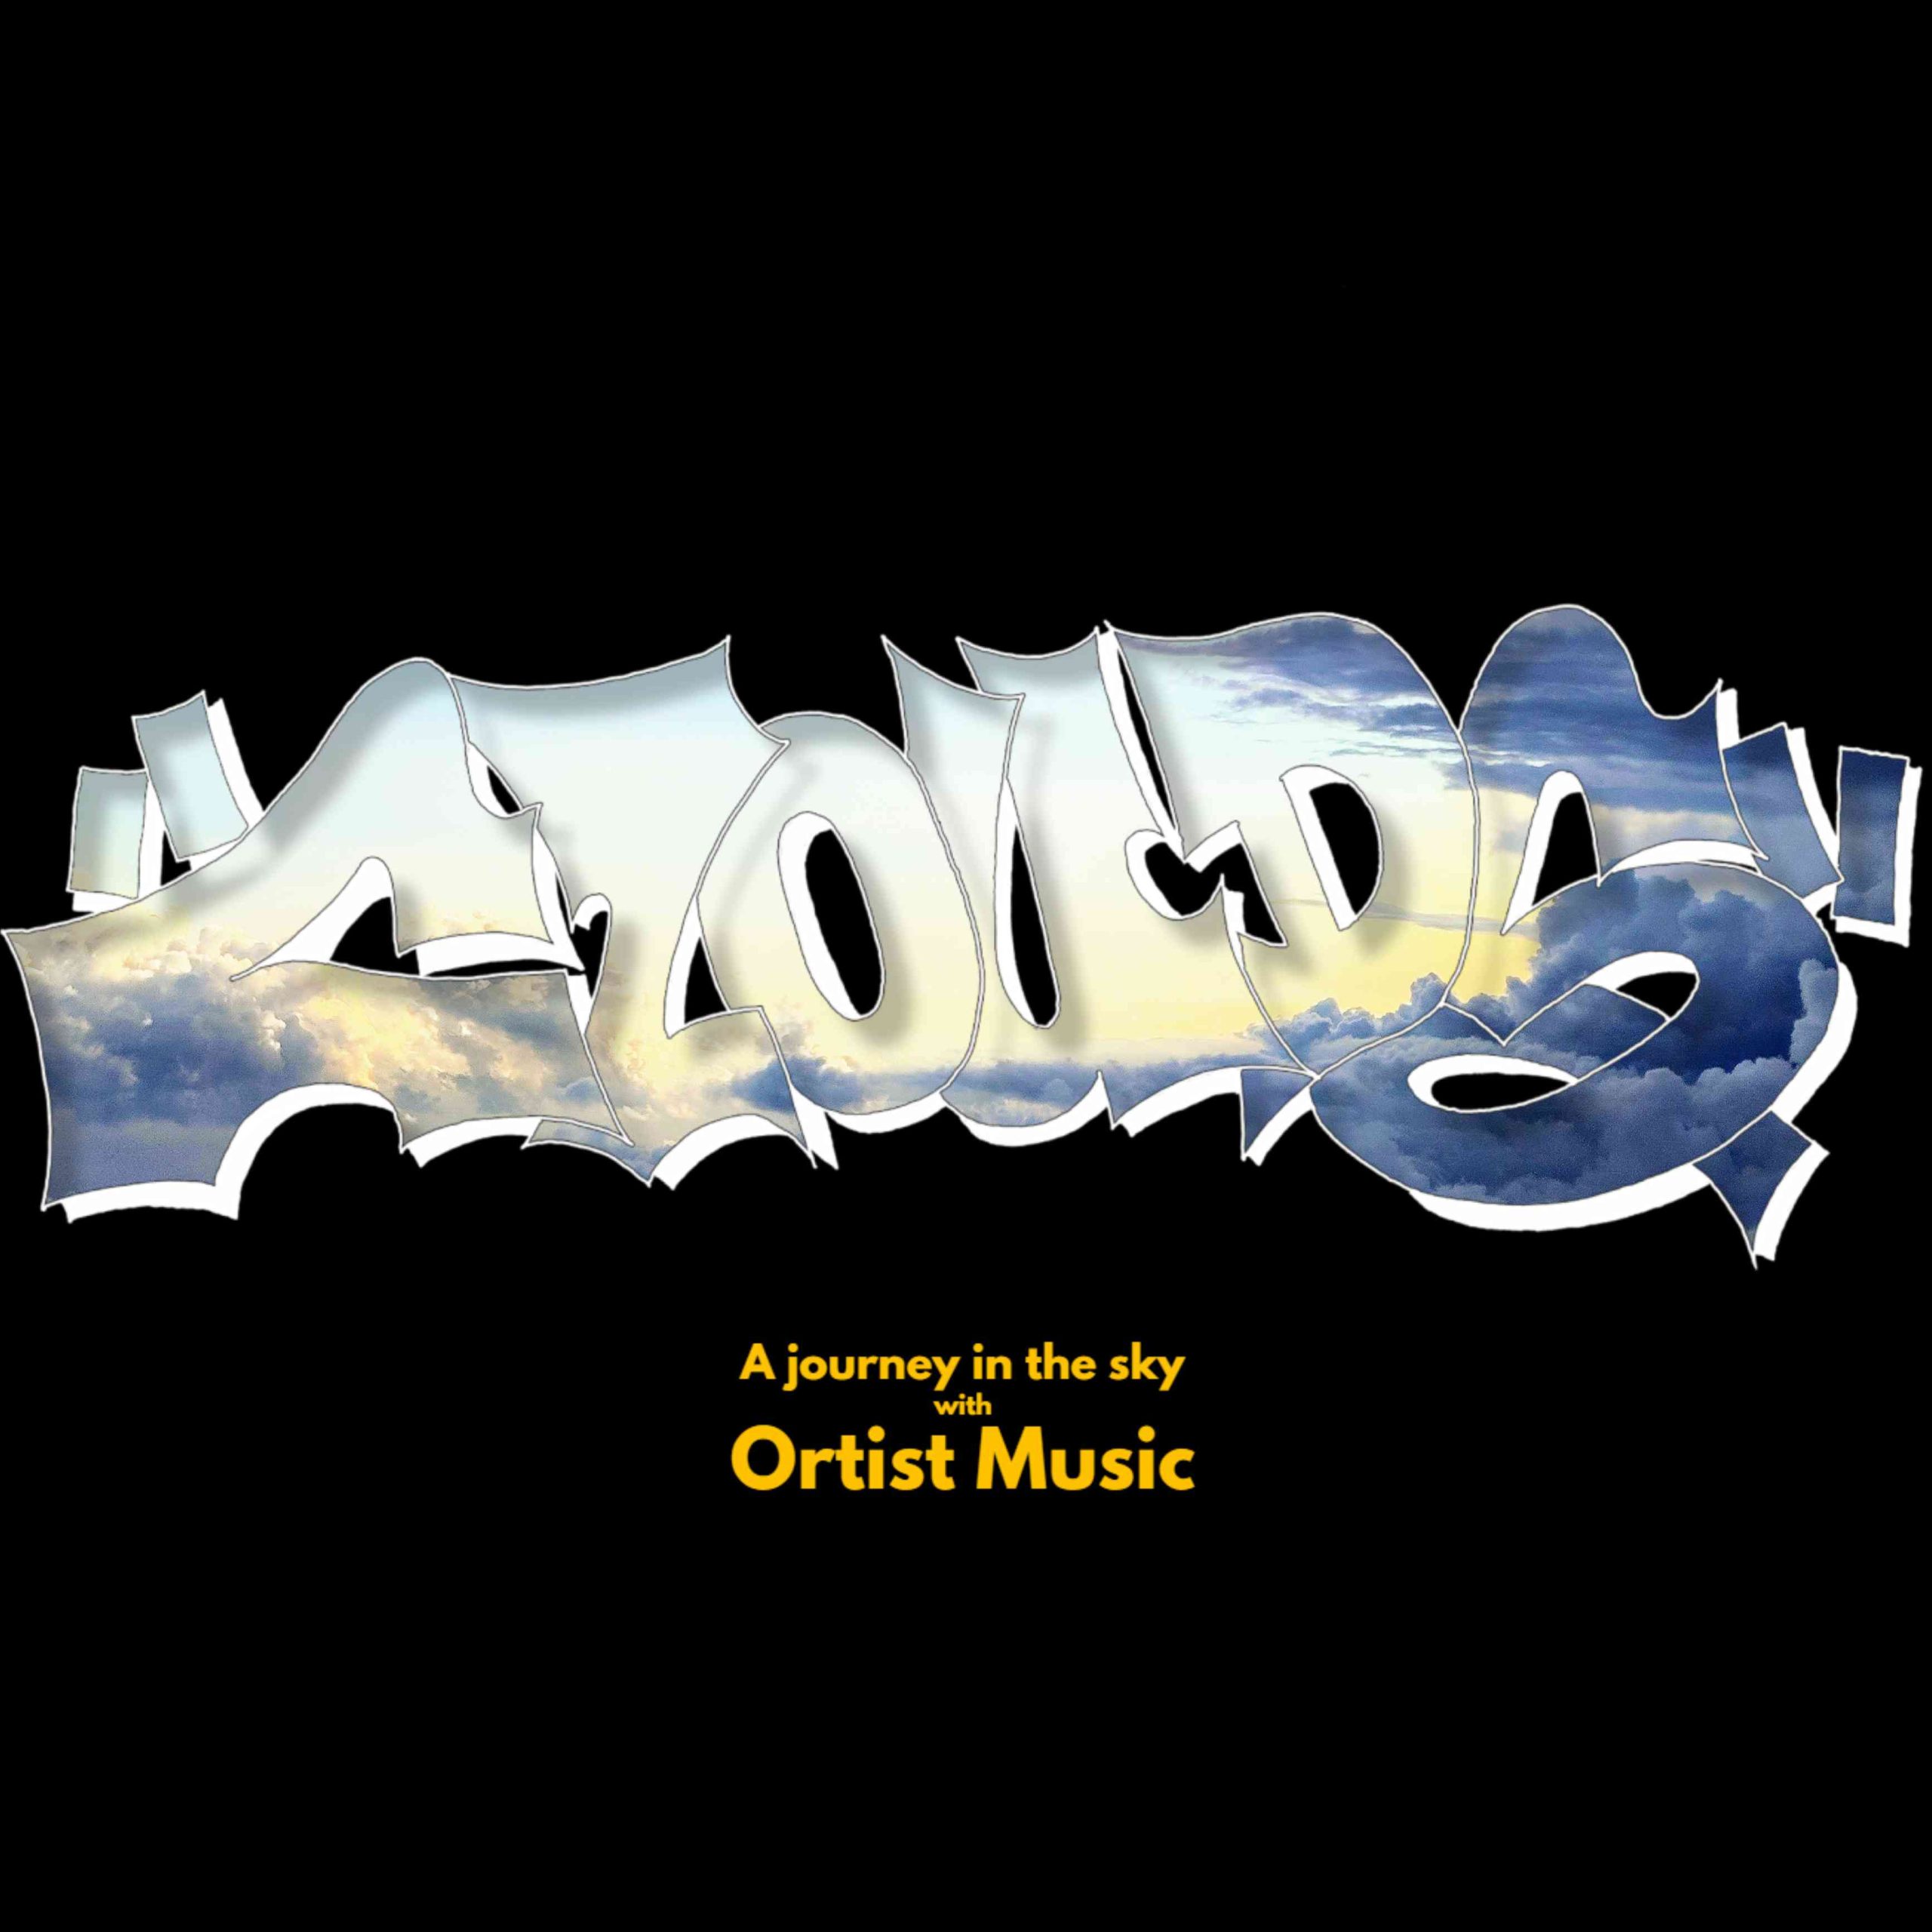 Ortist Music - Clouds